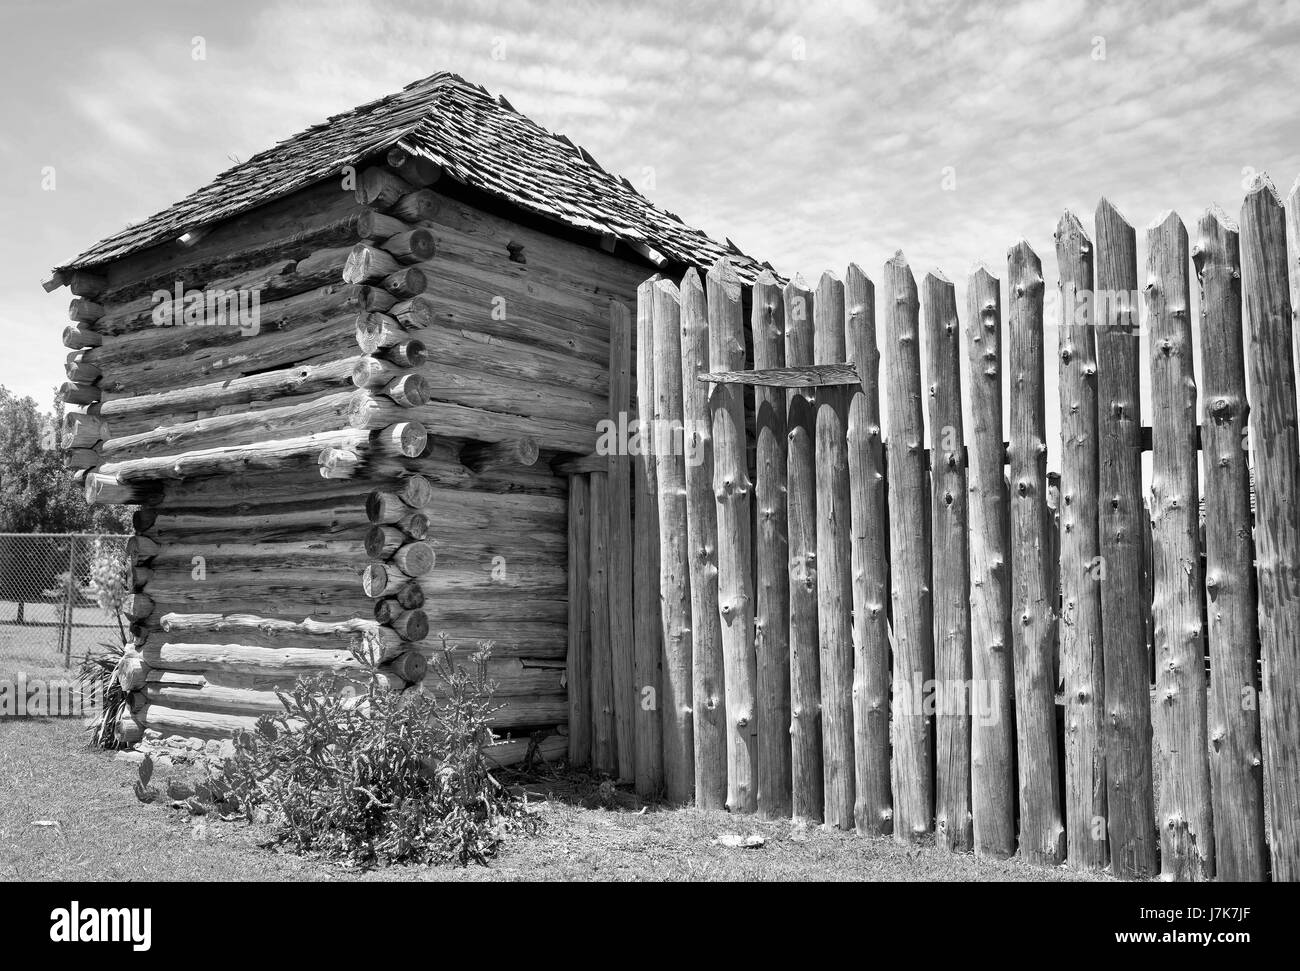 Old Wild West fort in black and white Stock Photo - Alamy